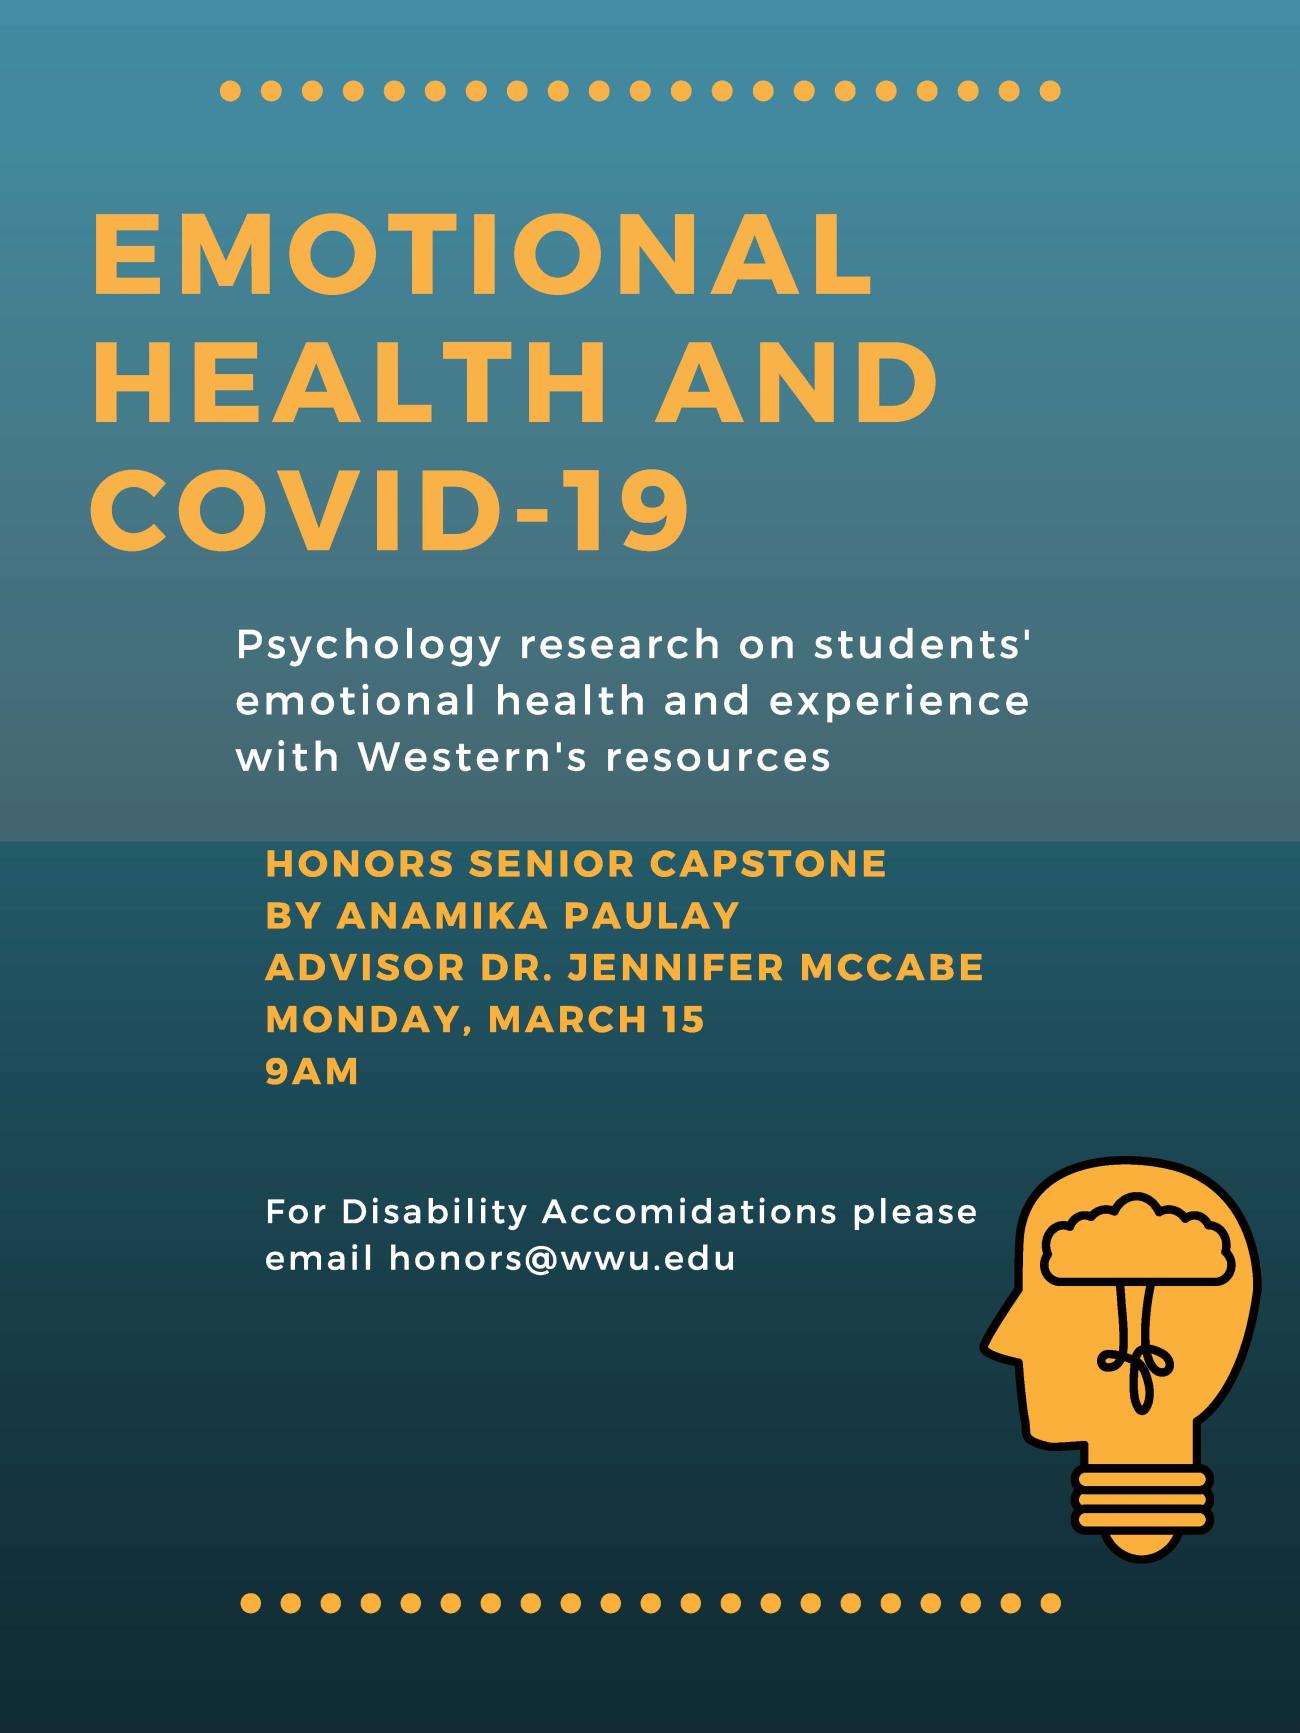 Text: "Emotional Health and COVID-19. Psychology research on students' emotional health and experience with Western's resources. Honors Senior Capstone by Anamika Paulay. Advisor Dr. Jennifer McCabe. Monday, March 15 9am. For disability accommodations please email honors@wwu.edu". Background: Dark blue gradient with yellow dots at the top and bottom of the text. To the right is a cartoon illustration of a lightbulb in the shape of a human side profile with a cloud with strings coming out of it inside.